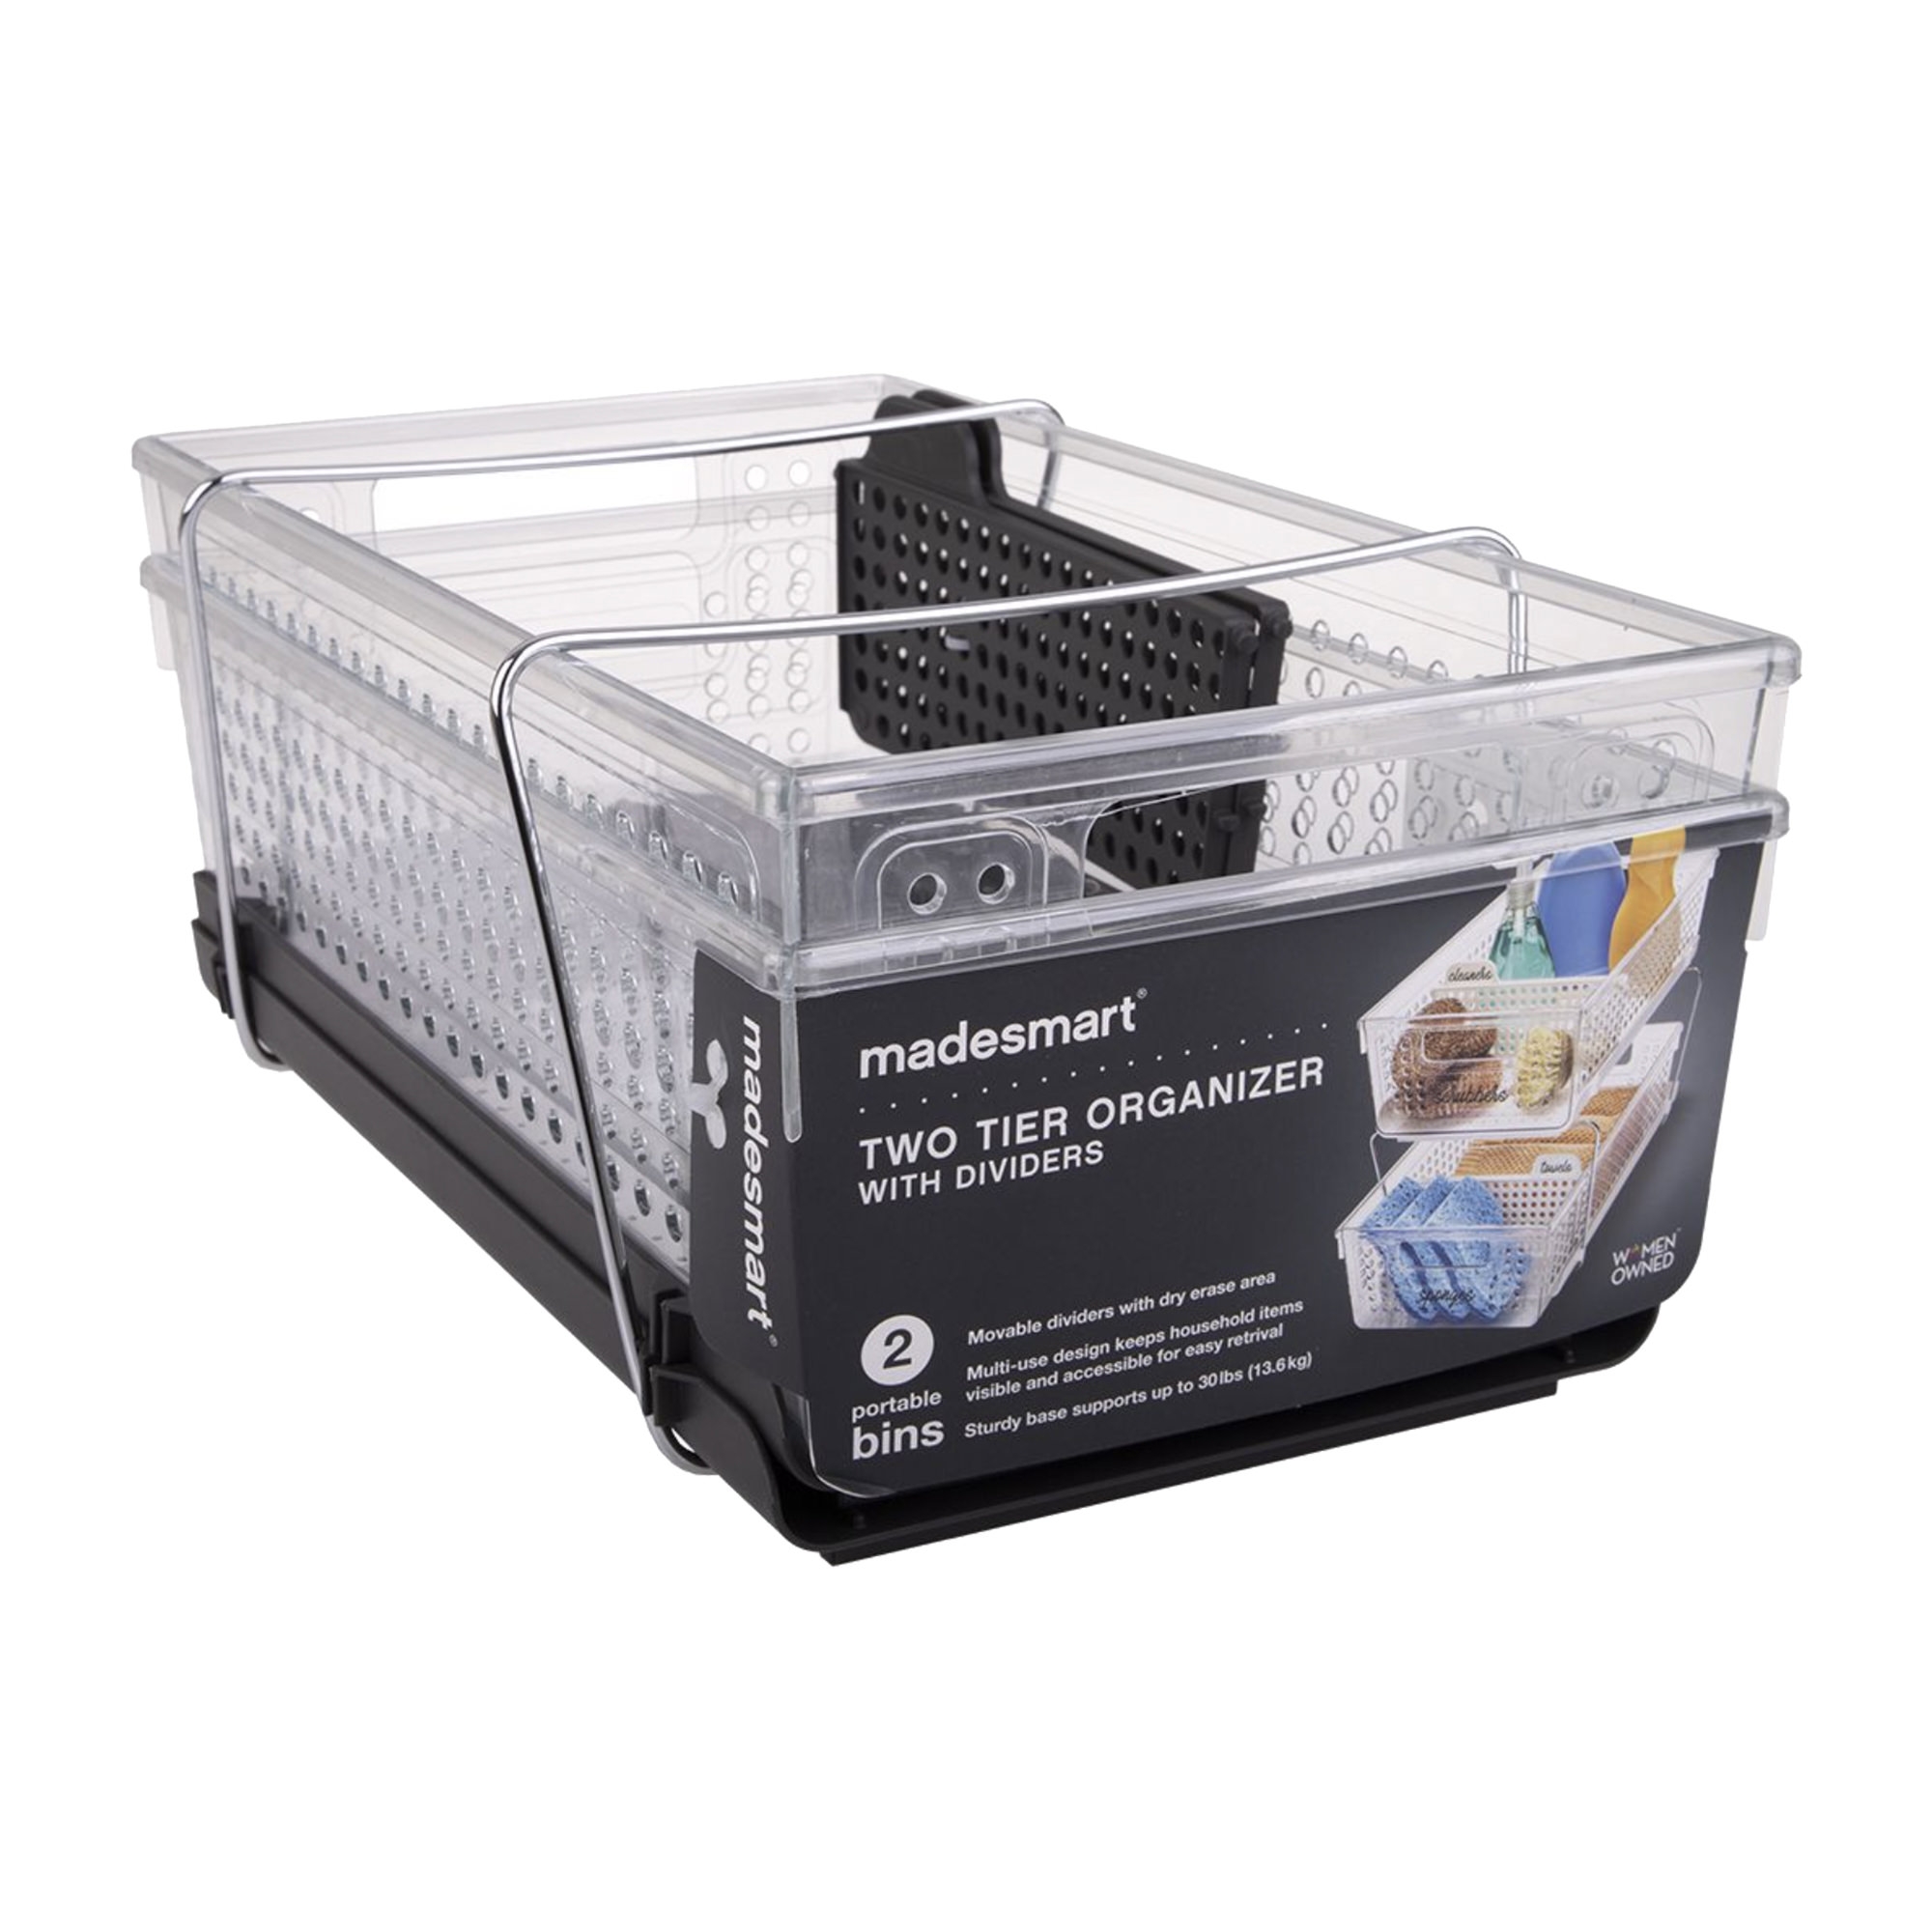 Madesmart 2 Tier Storage Organiser with Dividers Clear Image 2